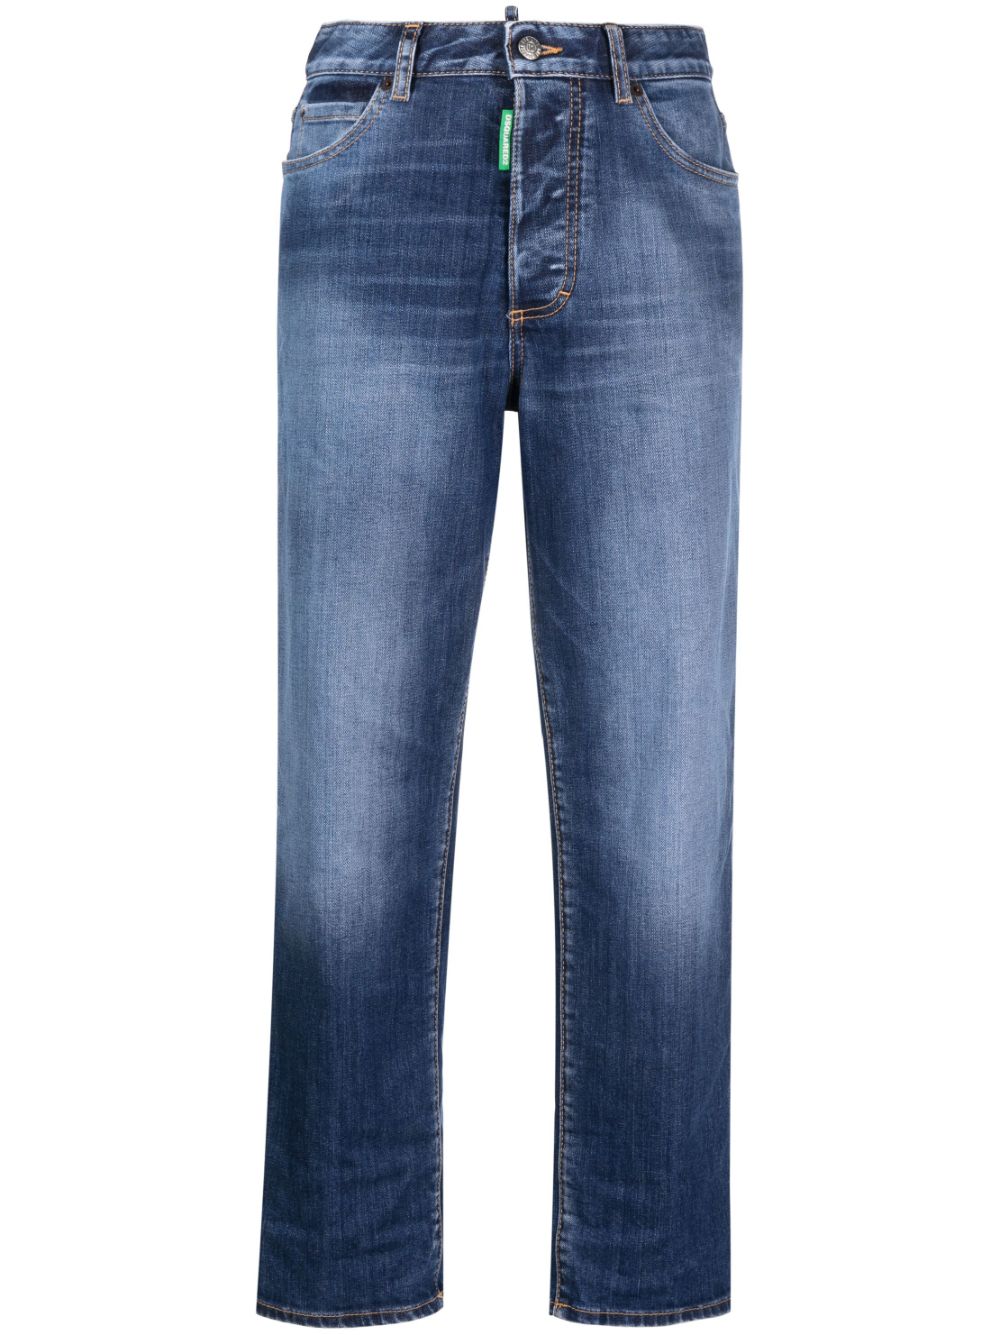 Dsquared2 One Life cropped jeans - Blue von Dsquared2